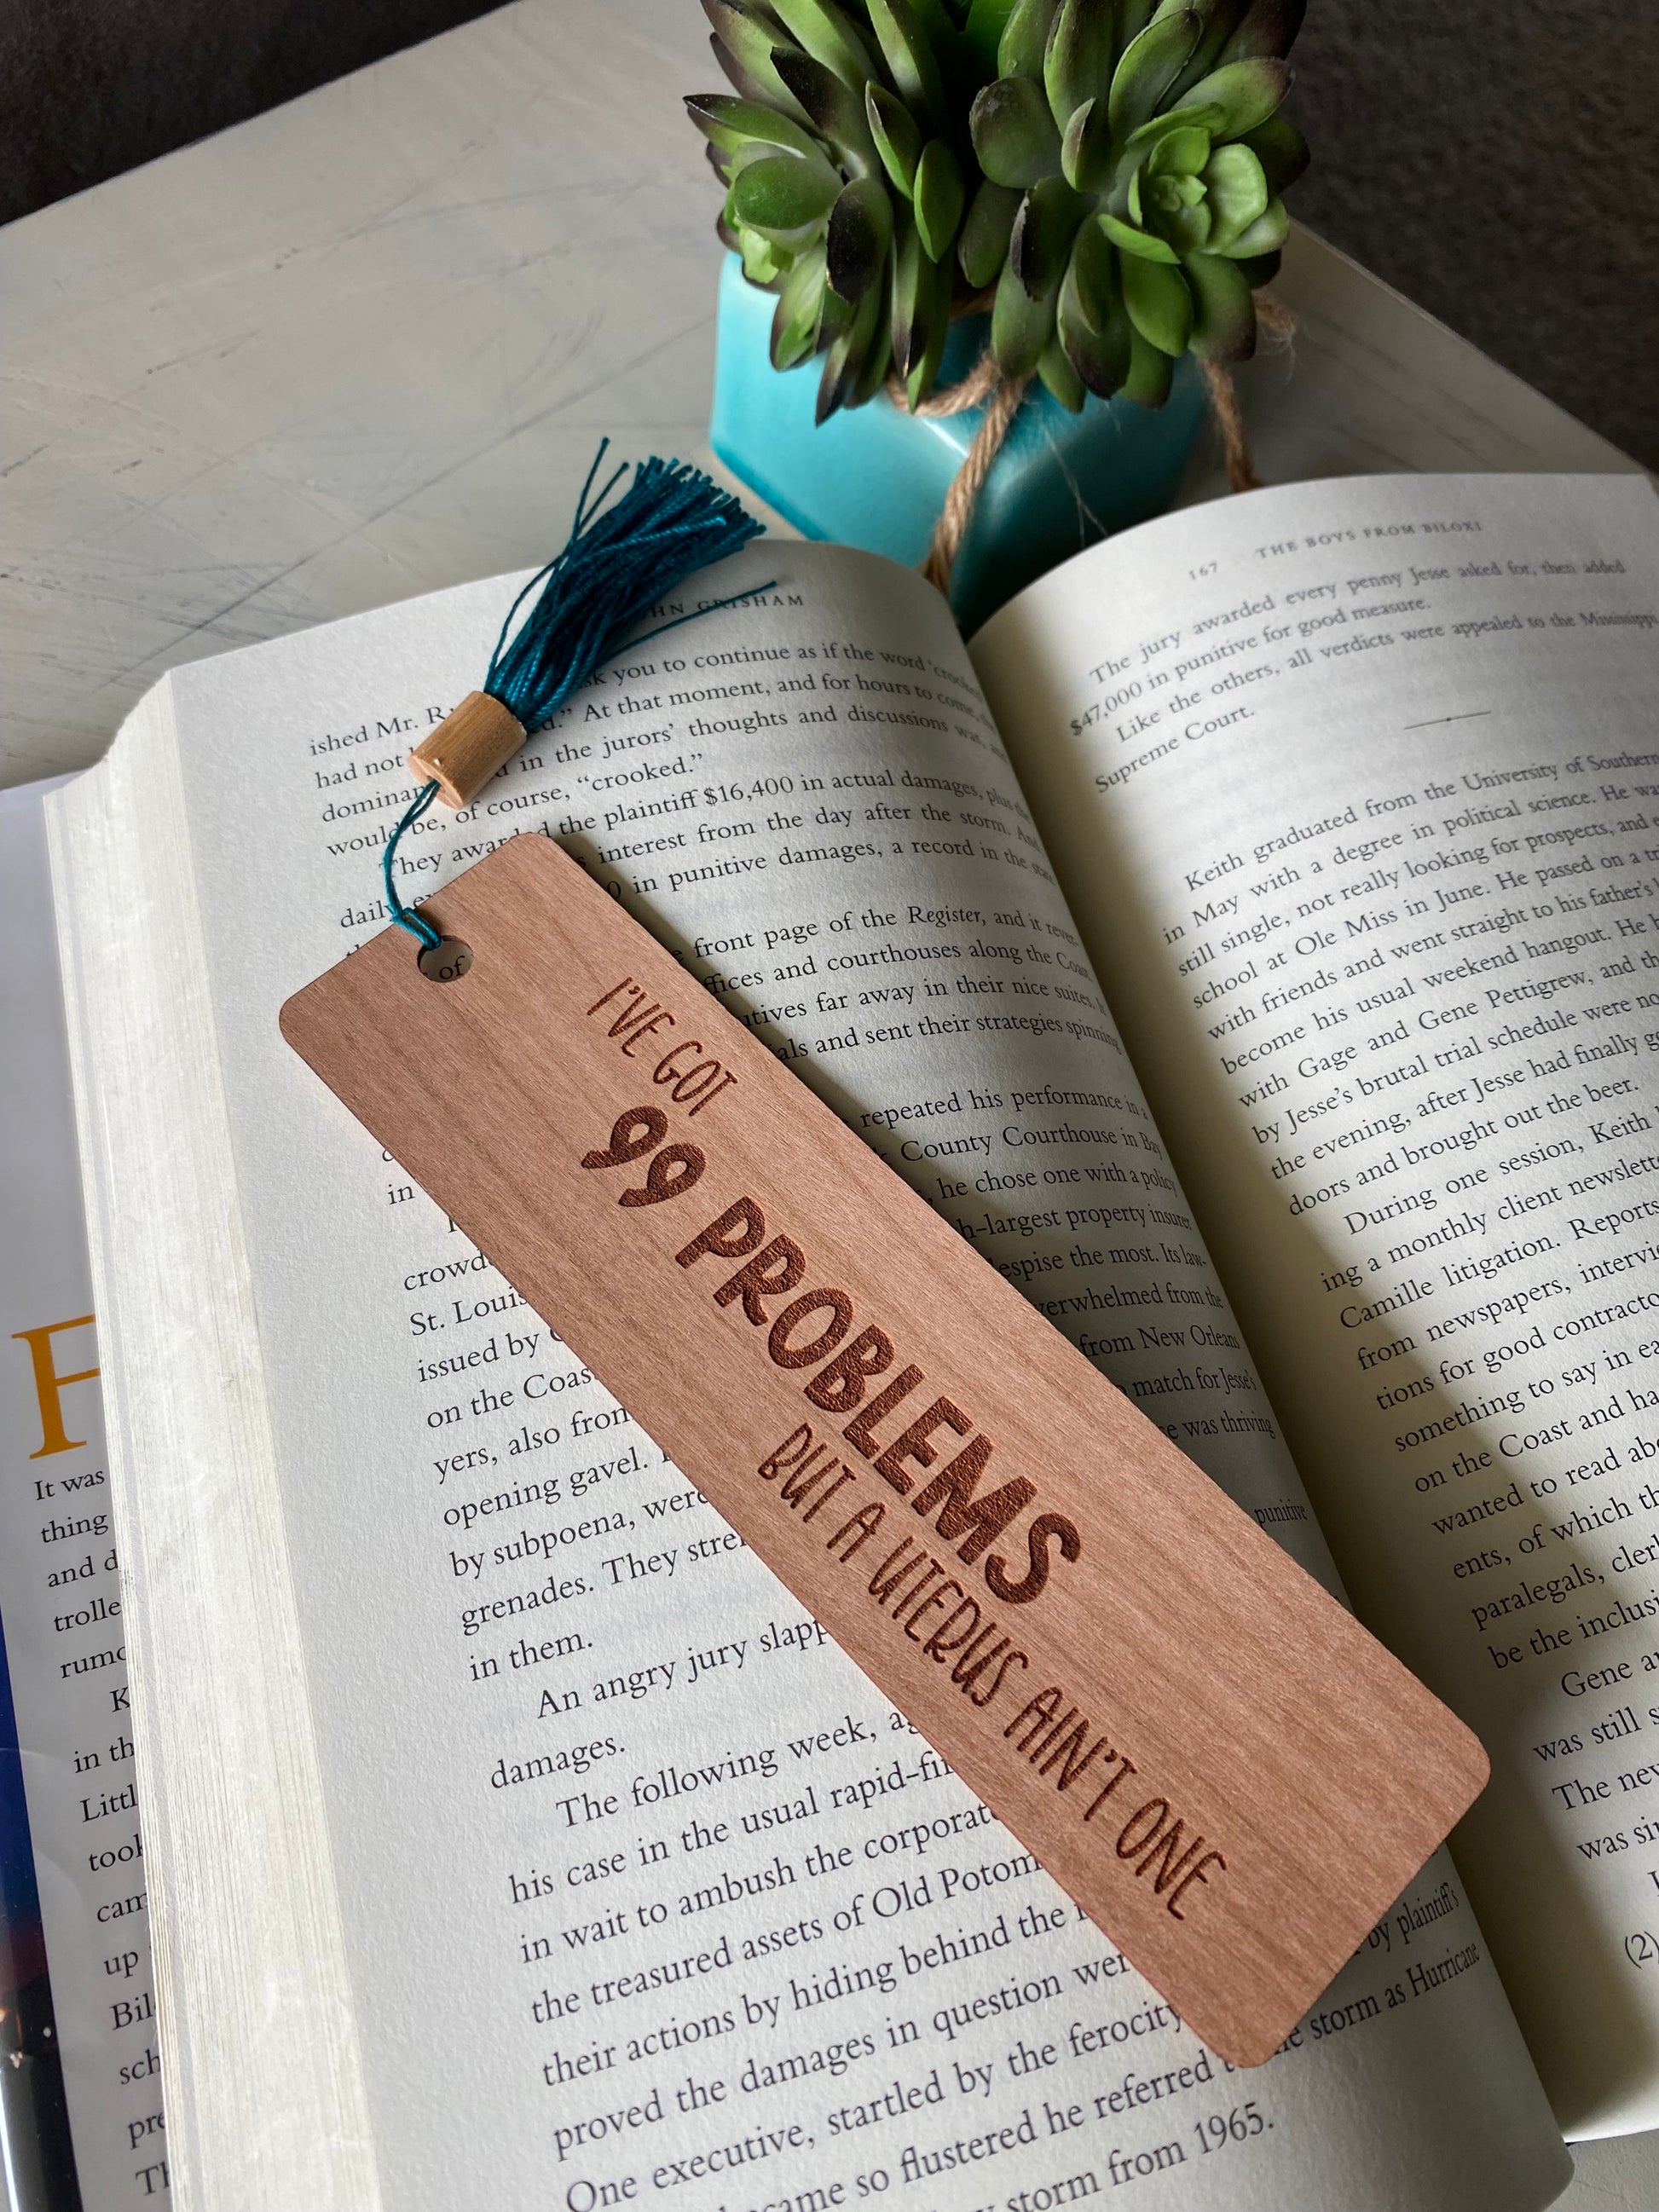 I've got 99 problems but a uterus ain't one - wood bookmark - funny hysterectomy gift - Novotny Designs